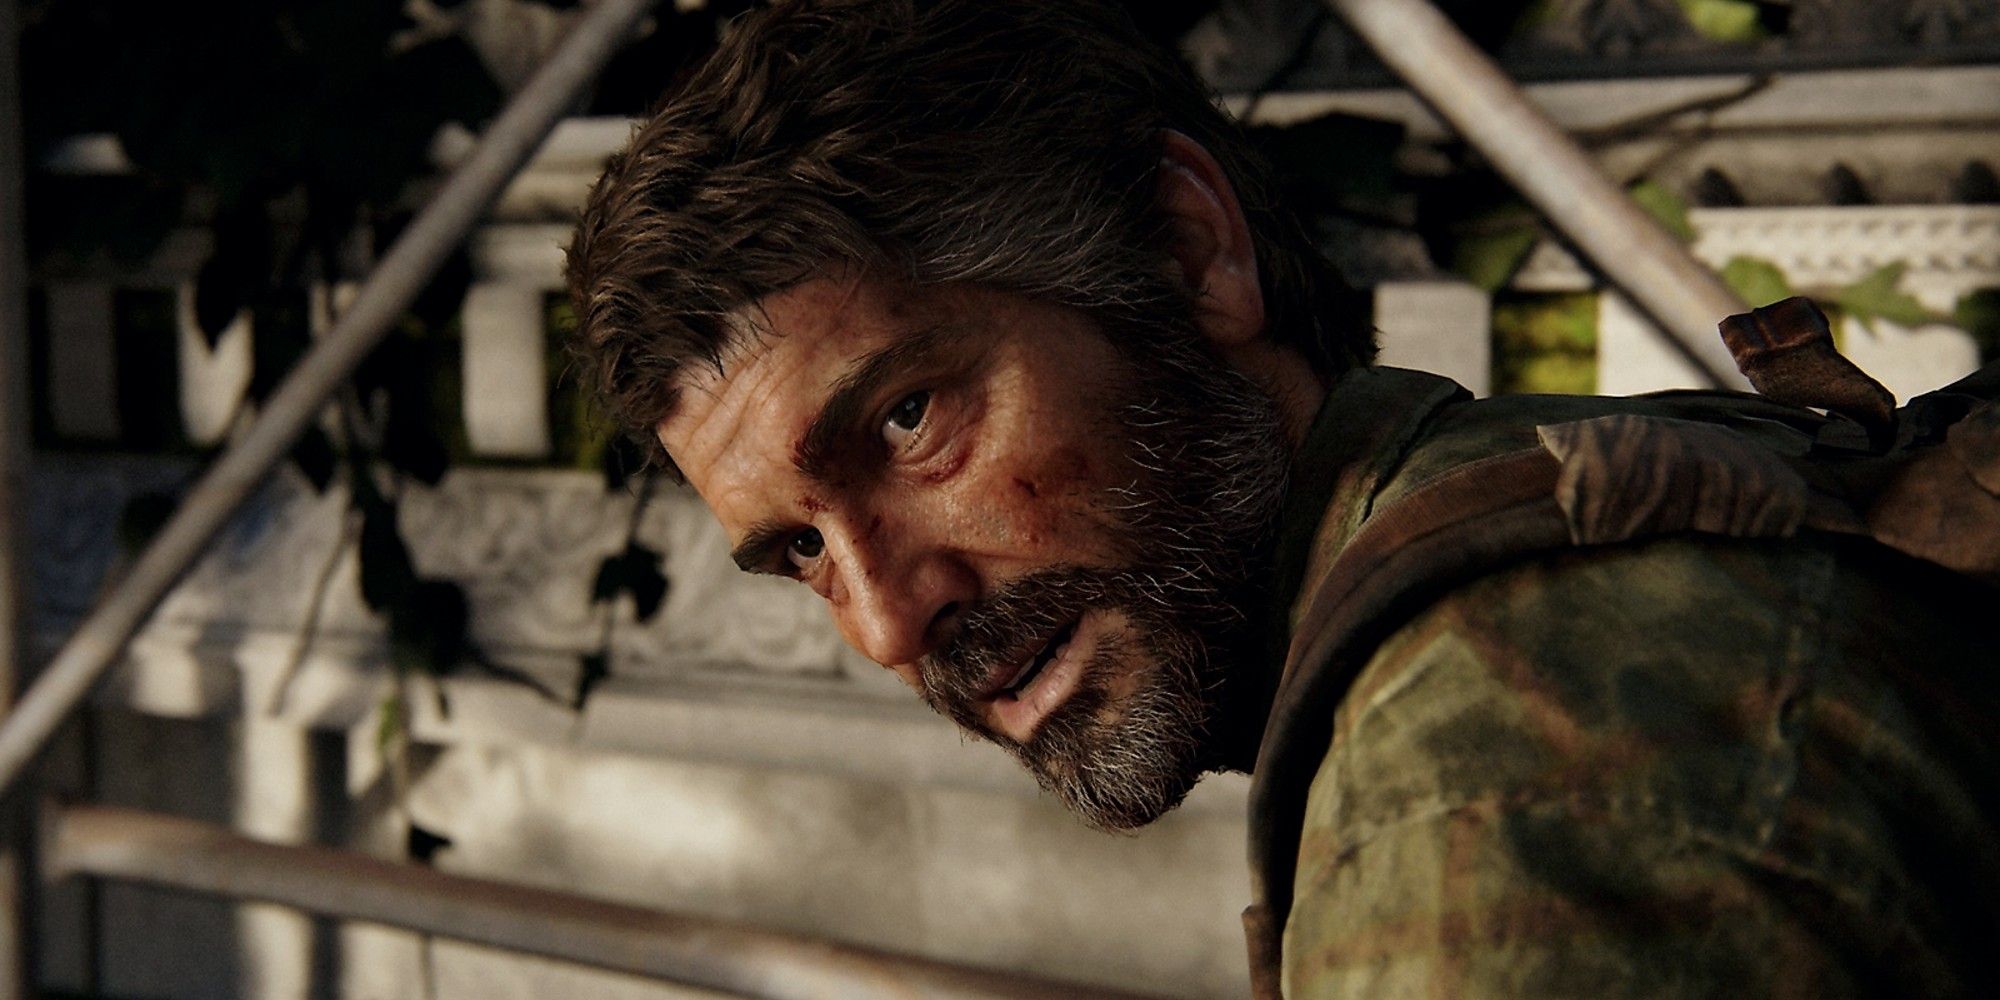 The Last of Us Part I Finally Reveals Joel's Birthday and Age, and